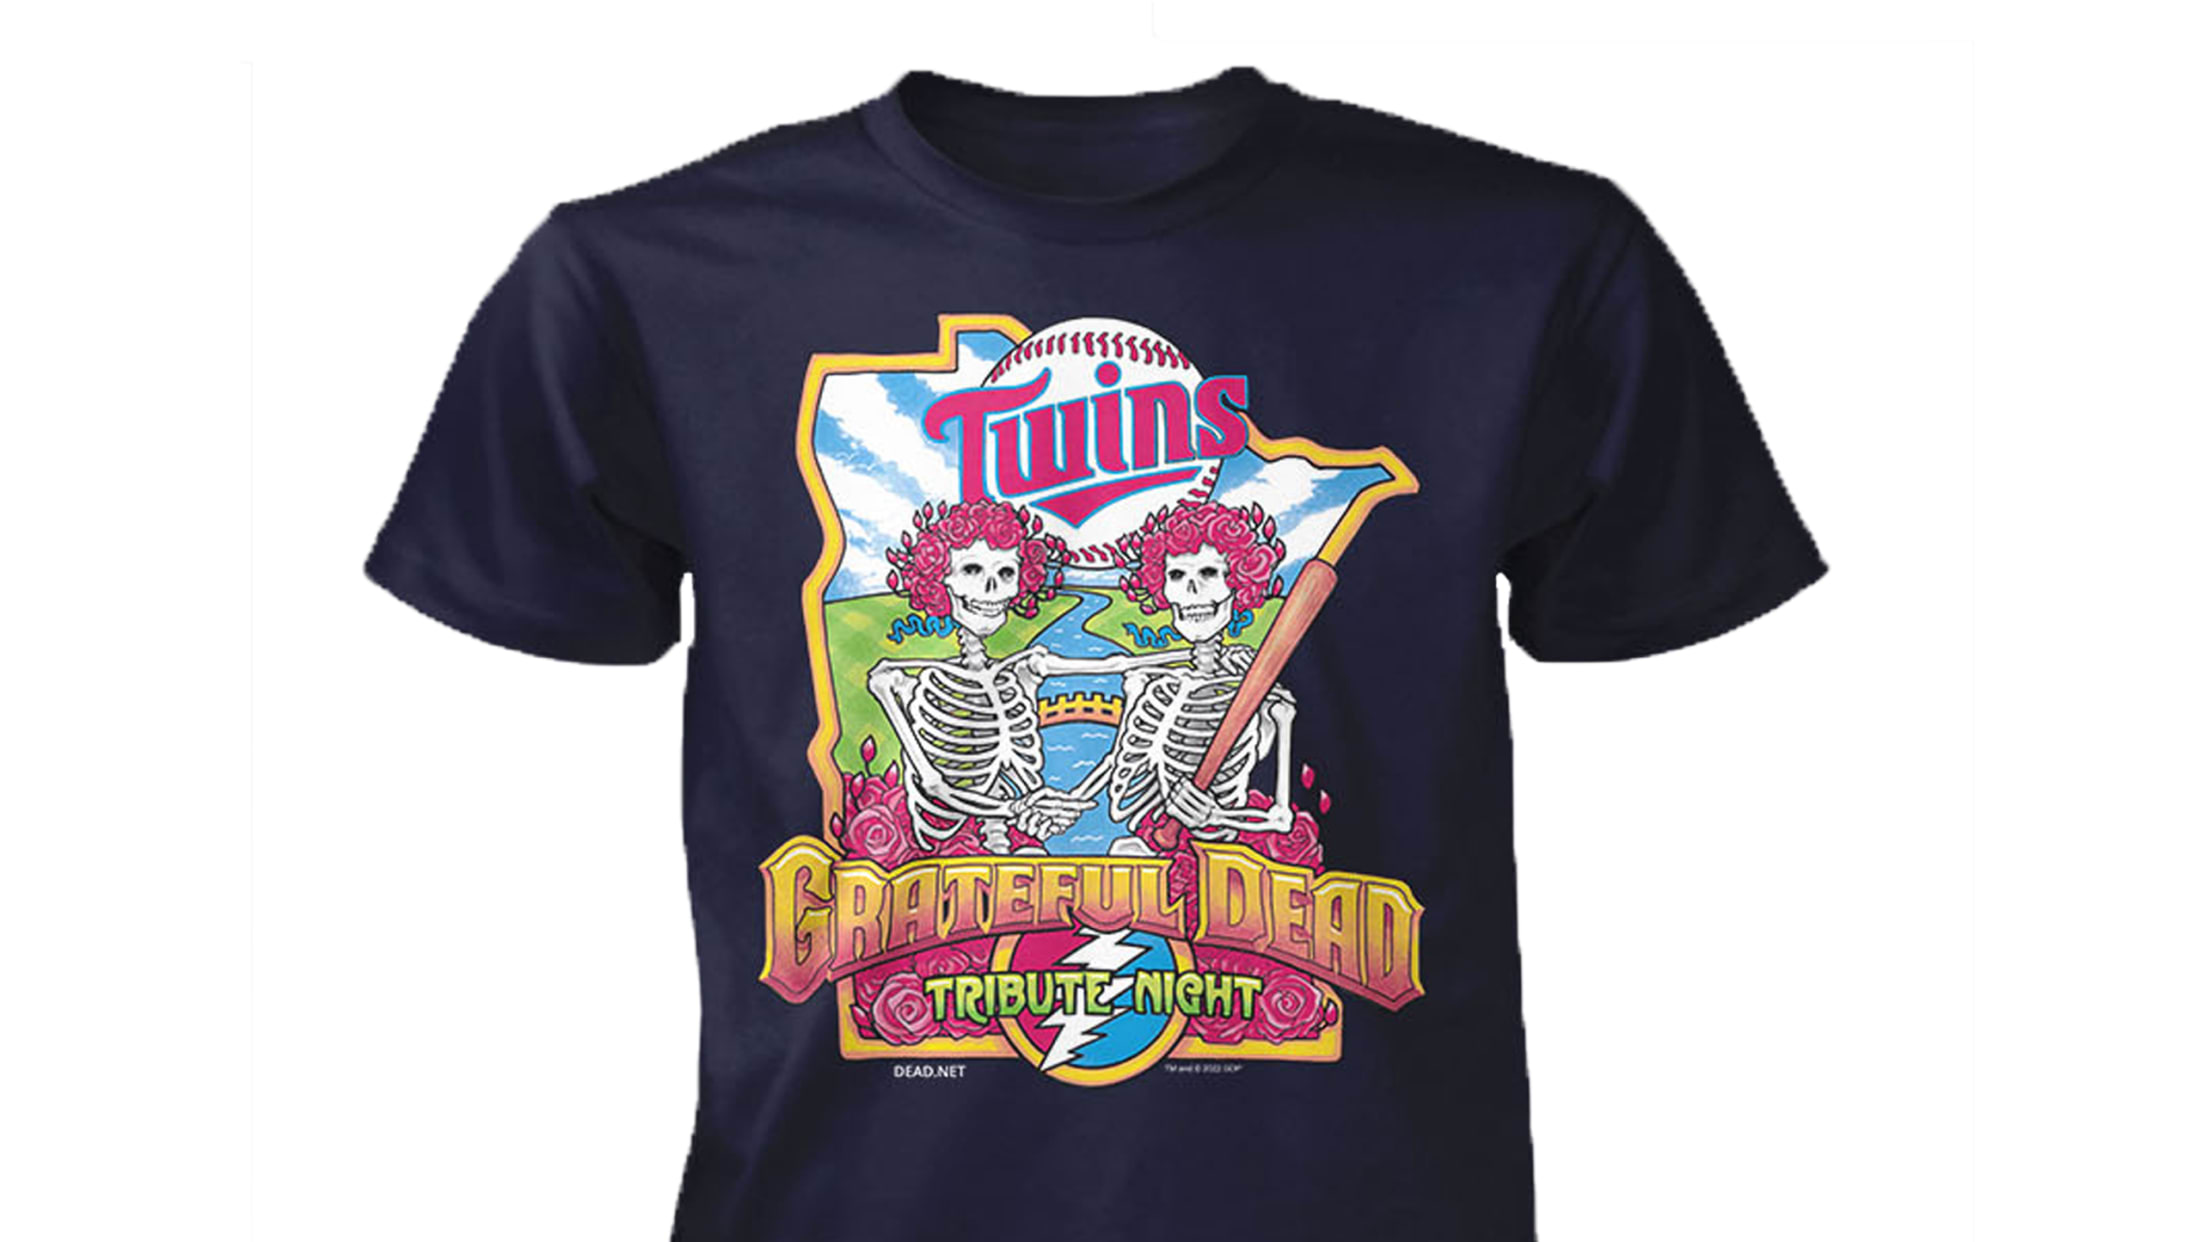 MLB x Grateful Dead x Cubs T-Shirt from Homage. | Light Blue | Vintage Apparel from Homage.